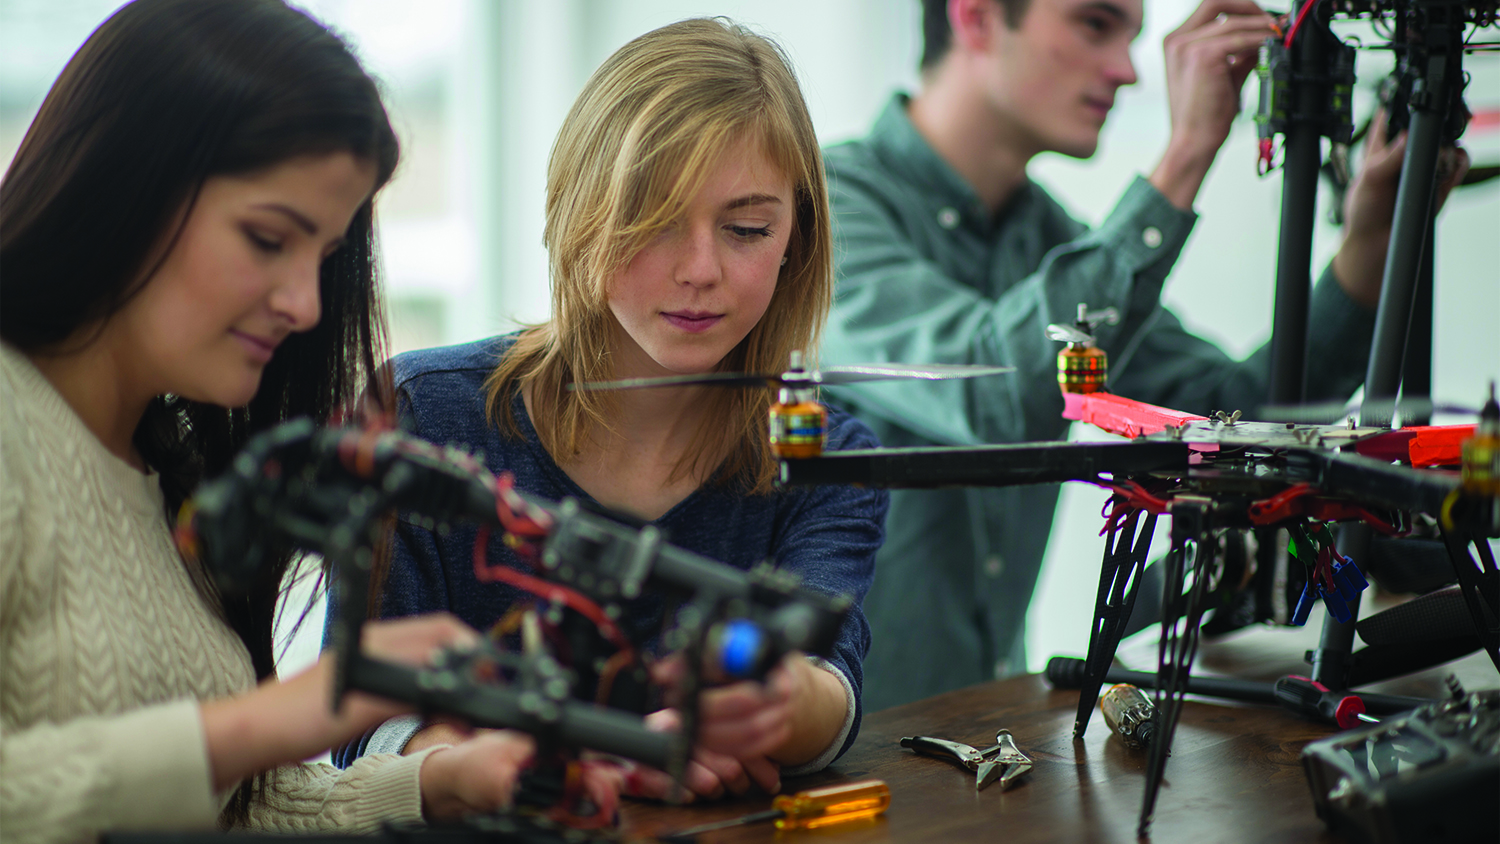 A group of college students are working on the mechanics for a robotics and drone project in university.